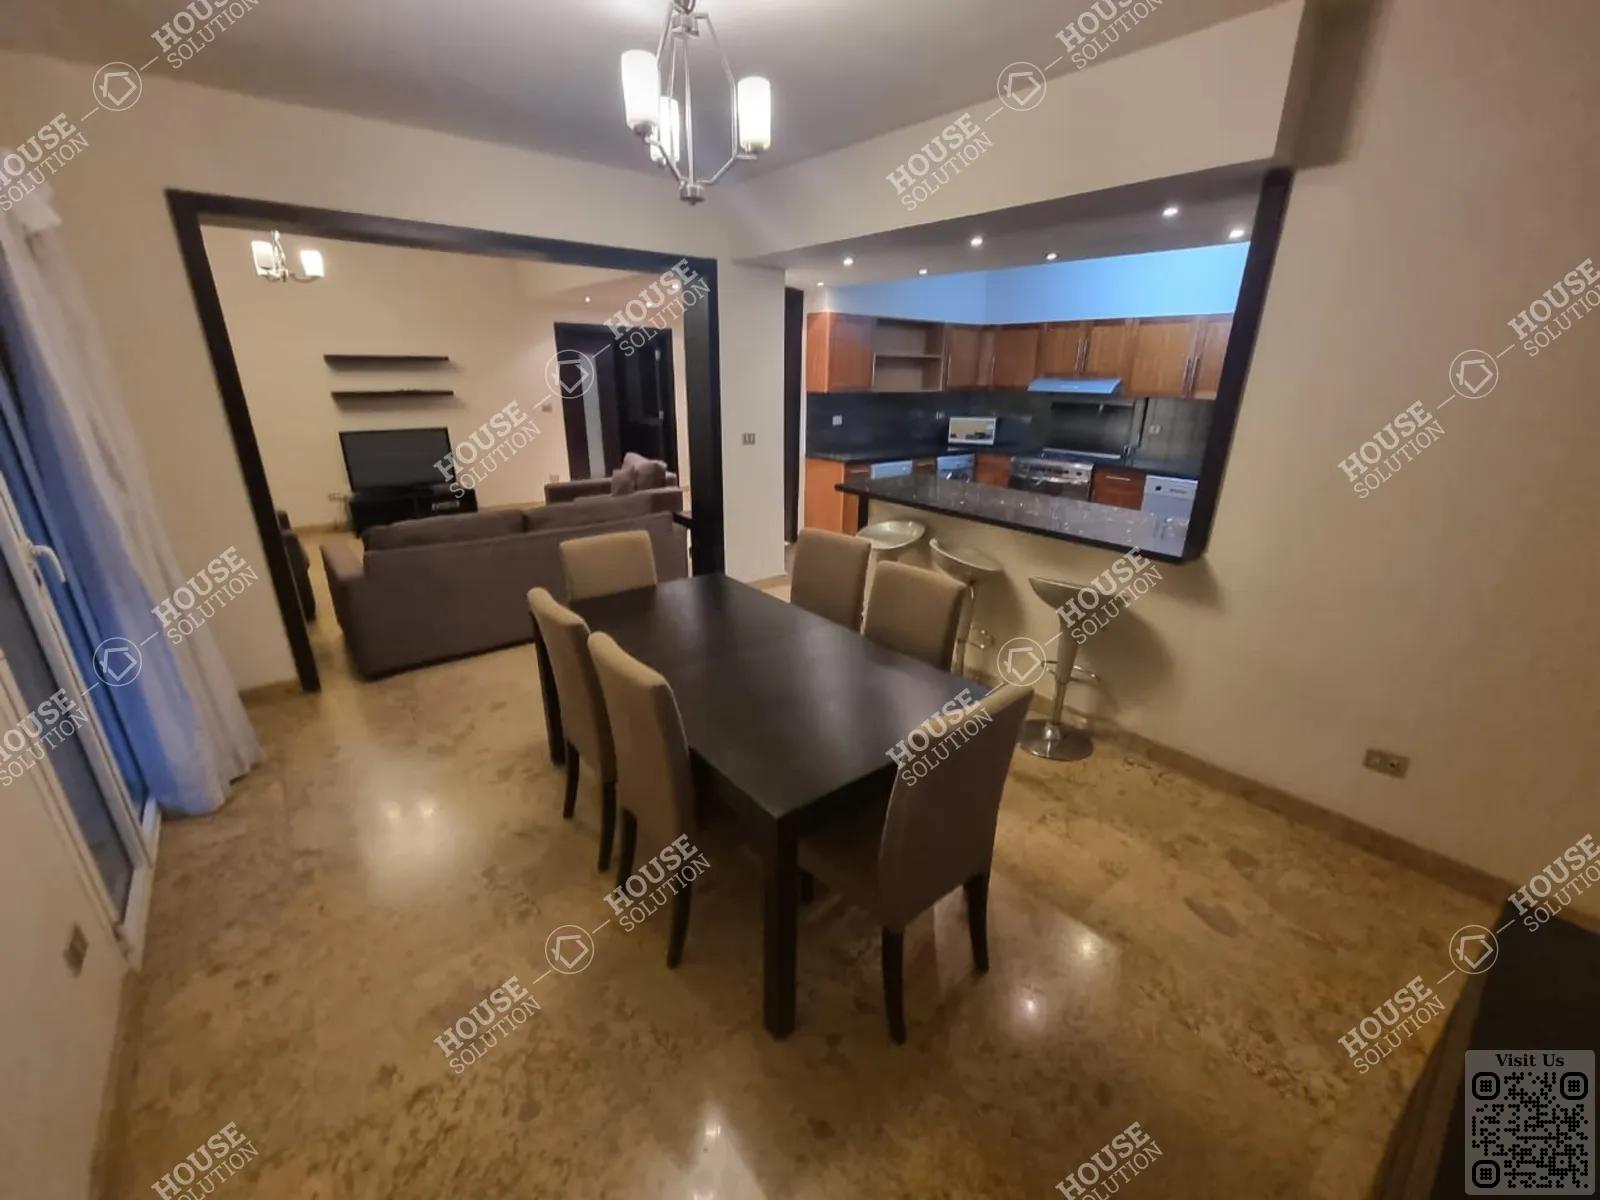 DINING AREA @ Apartments For Rent In Maadi Maadi Degla Area: 200 m² consists of 3 Bedrooms 2 Bathrooms Modern furnished 5 stars #4504-2